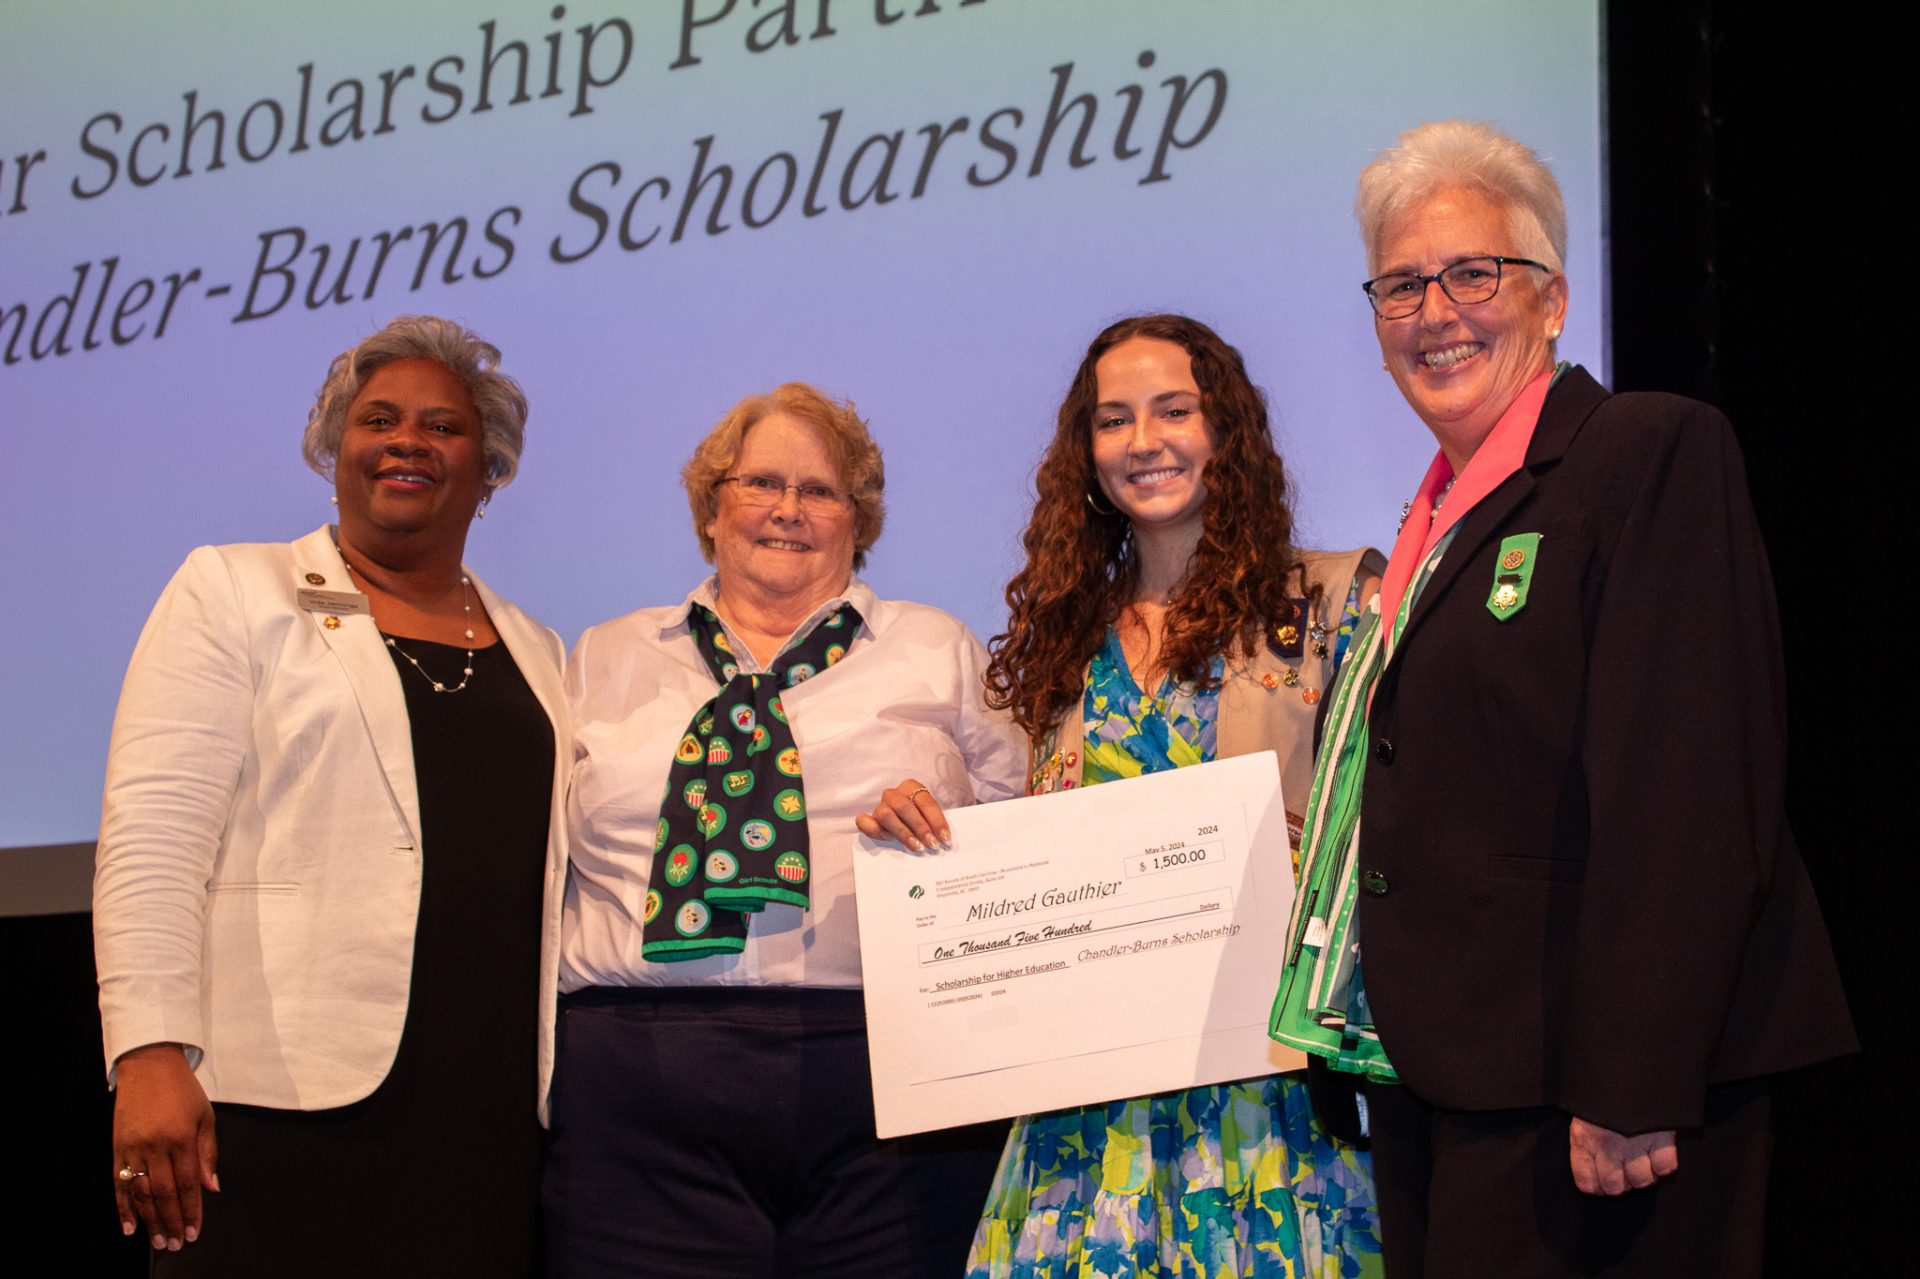 A girl scout poses onstage after earning Chandler-Burns Scholarship